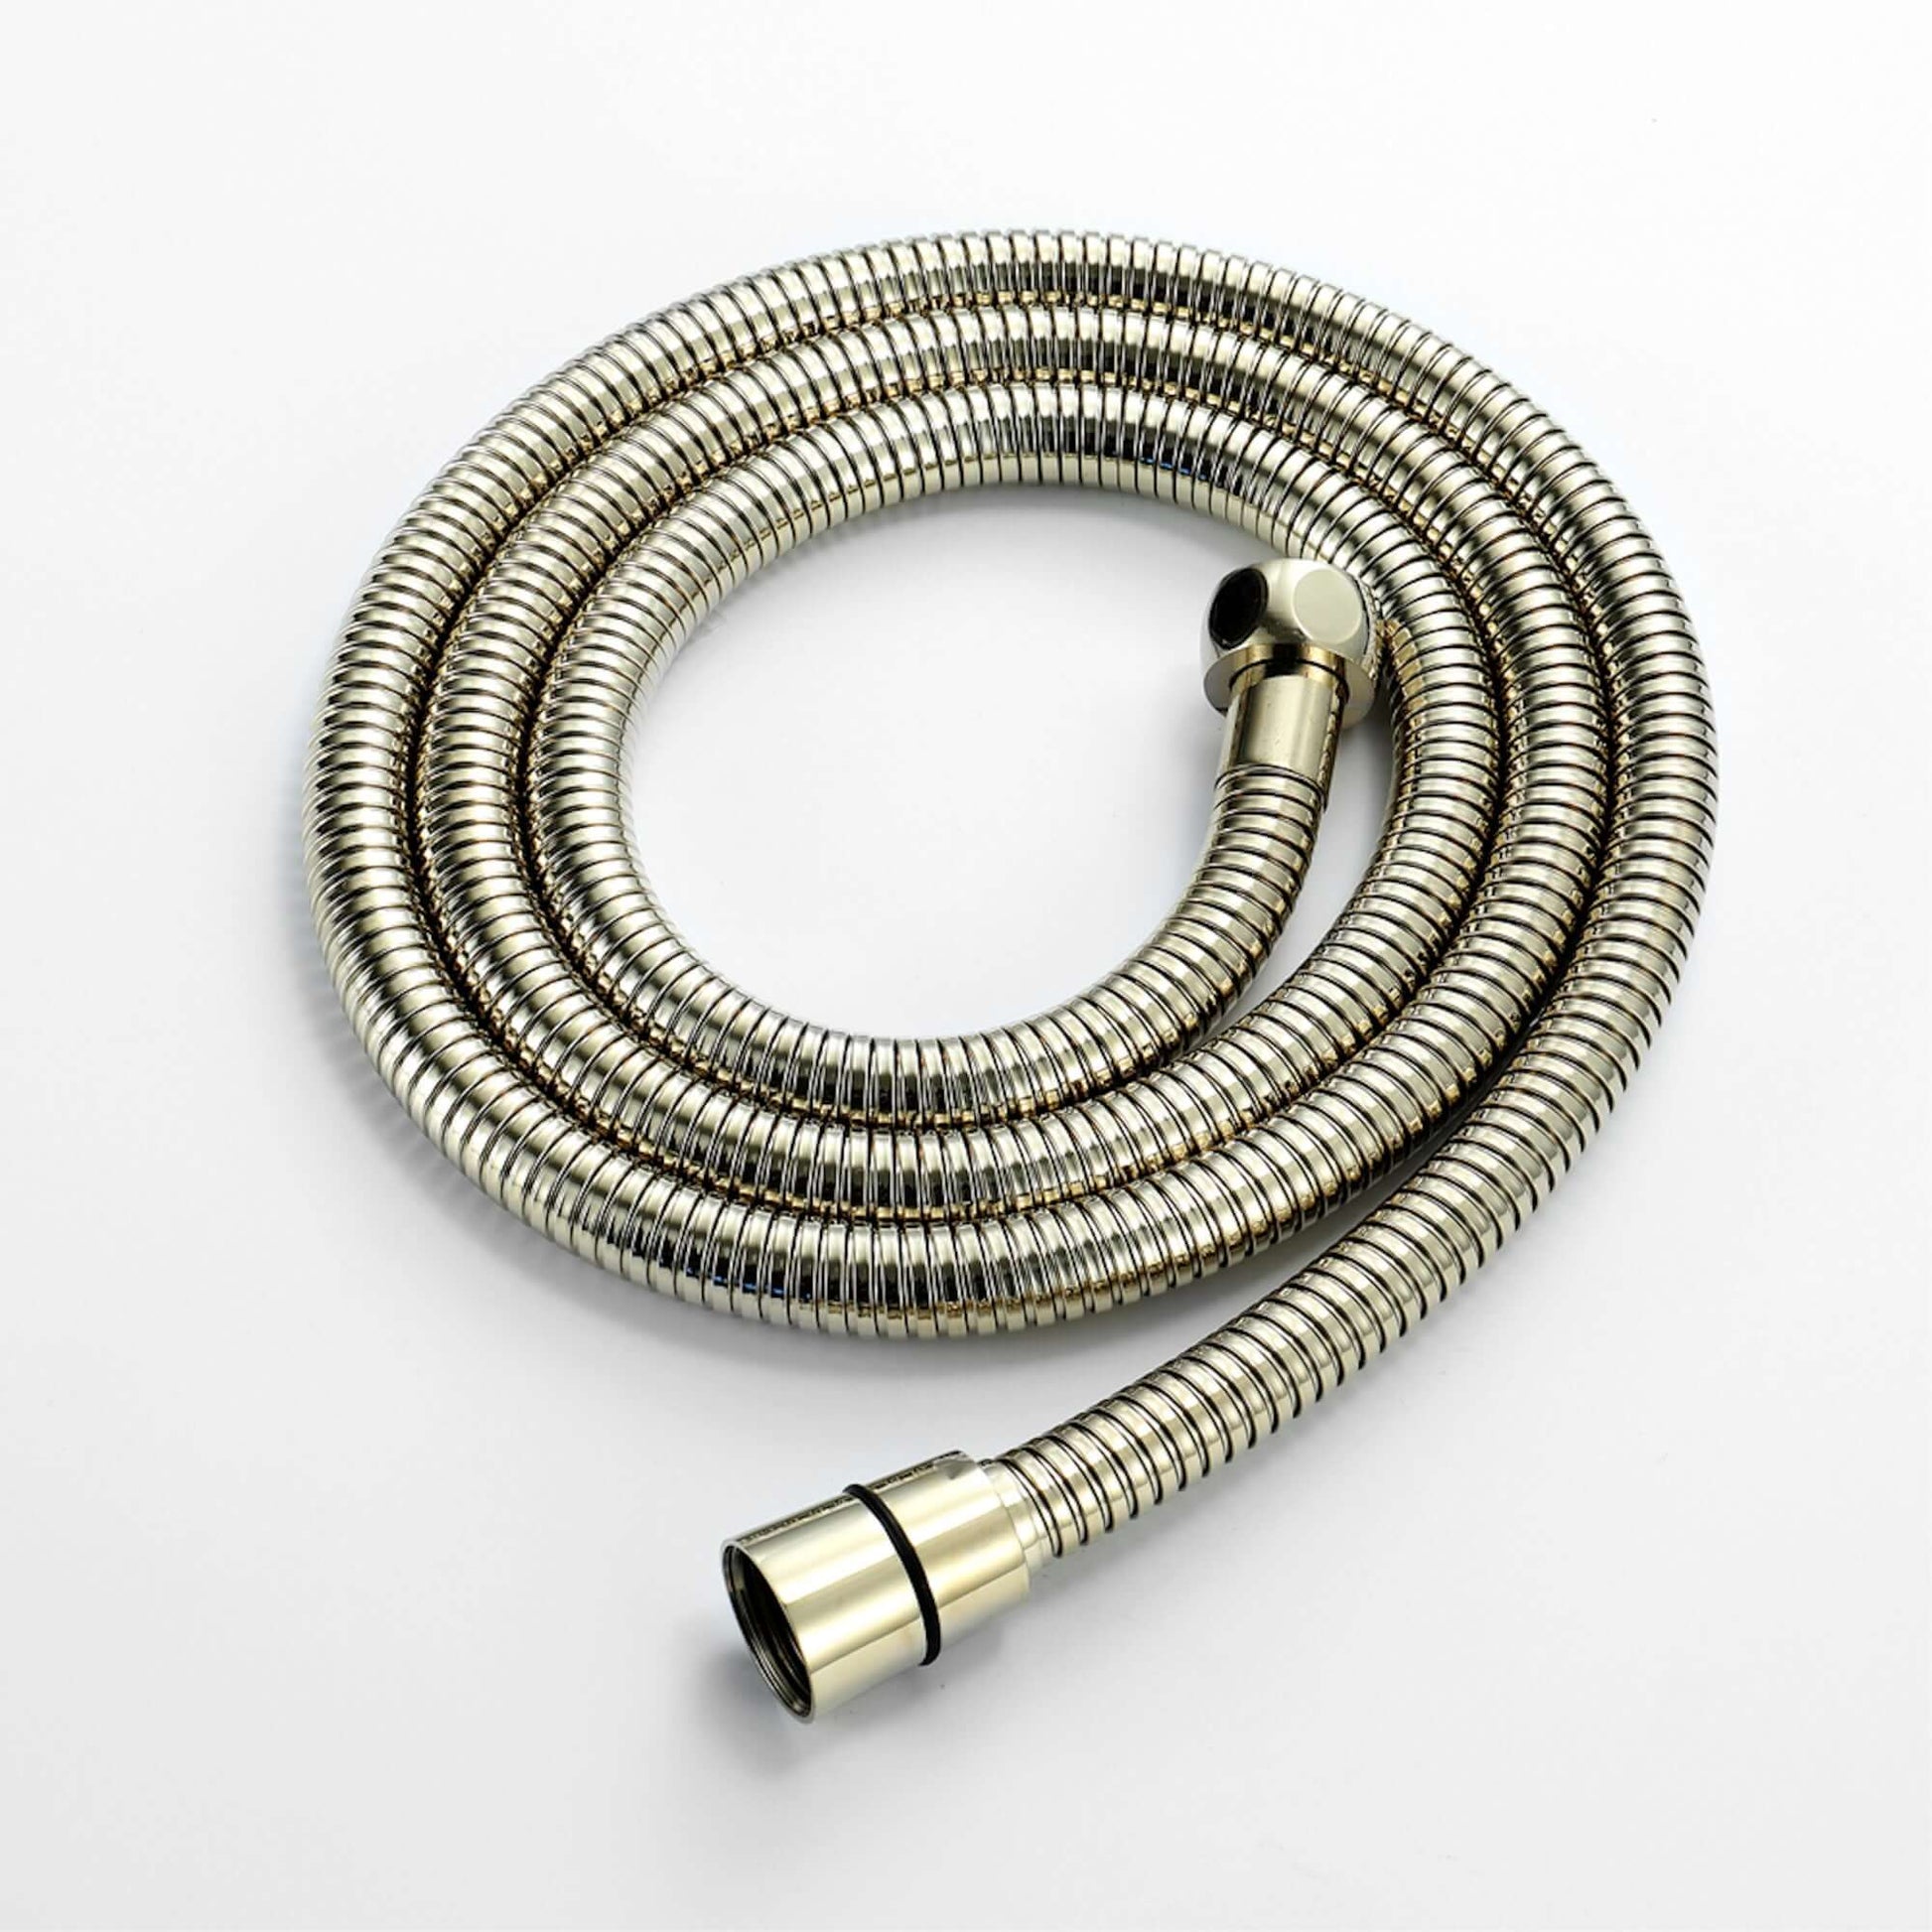 Flex shower hose stainless steel 1.75m standard bore - English gold - Showers